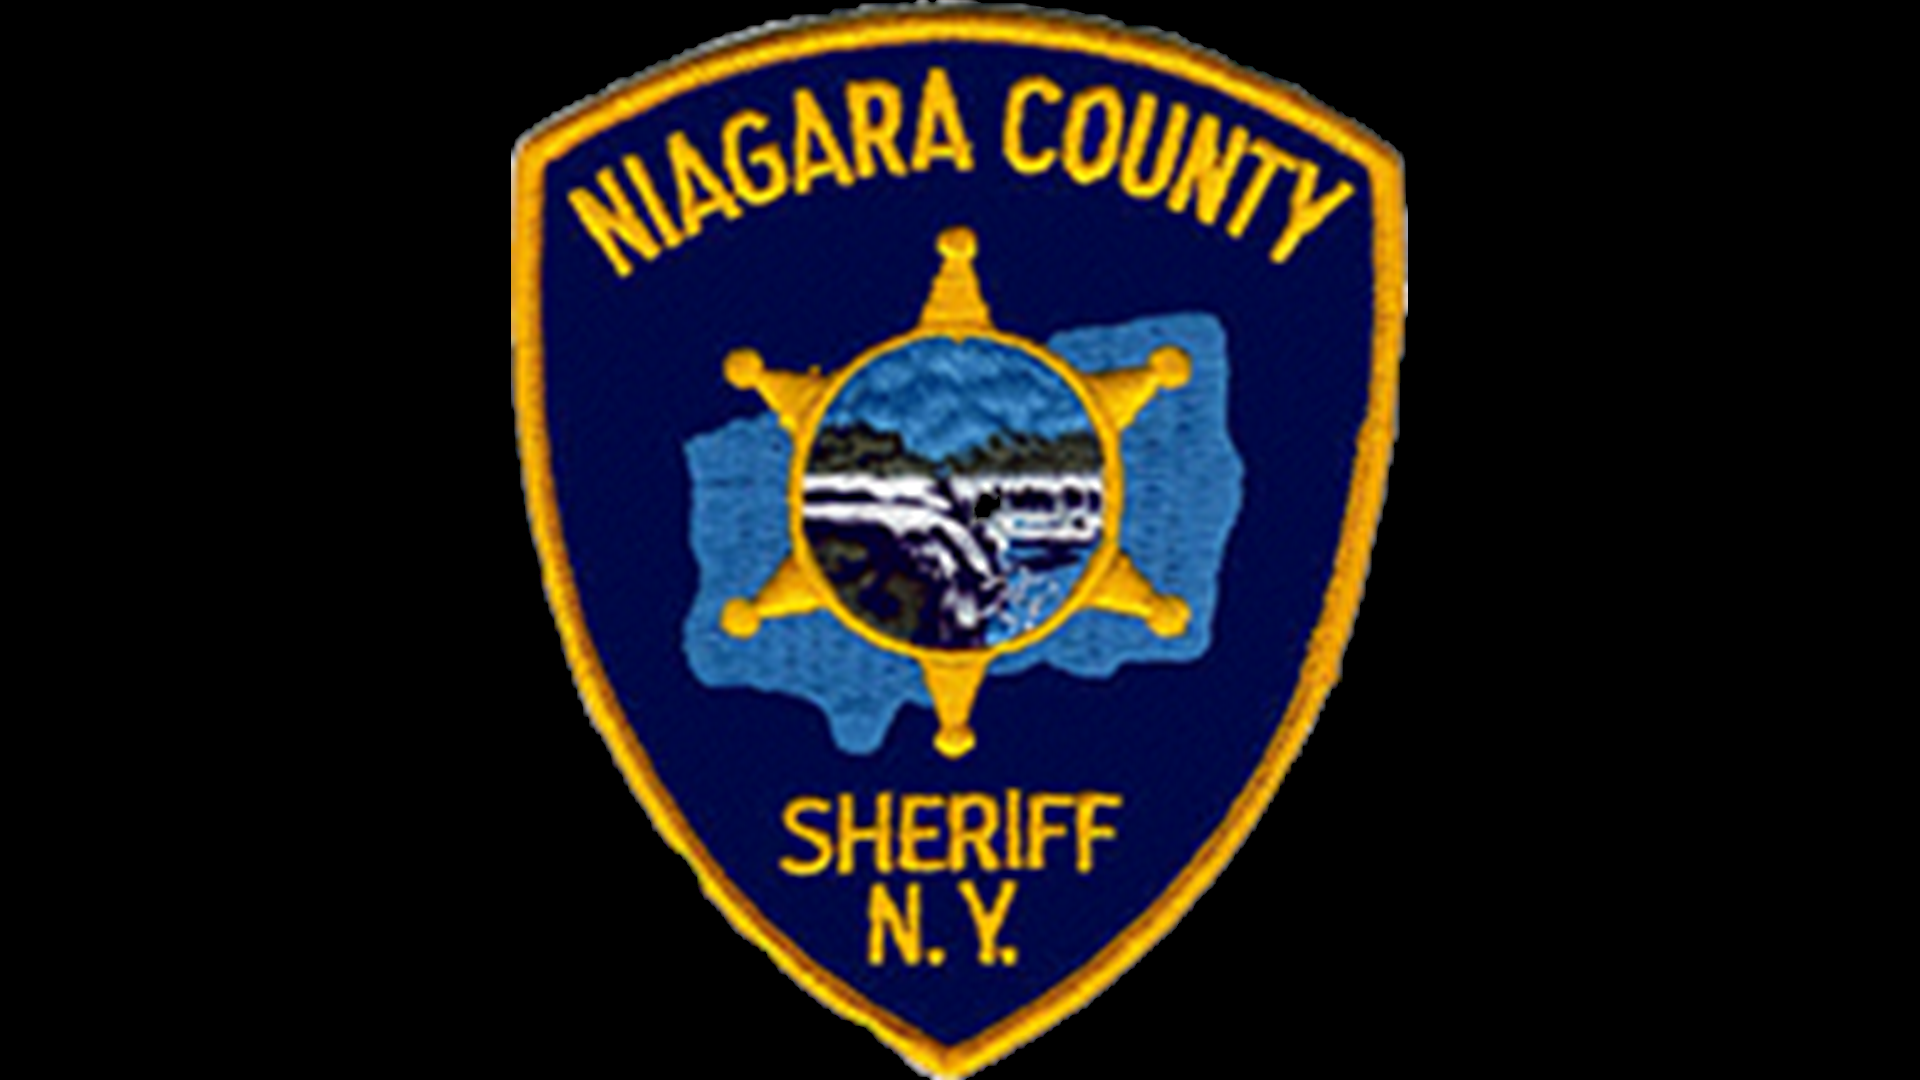 The identities of the man and woman are not known at this time, according to the Niagara County Sheriff's Office.